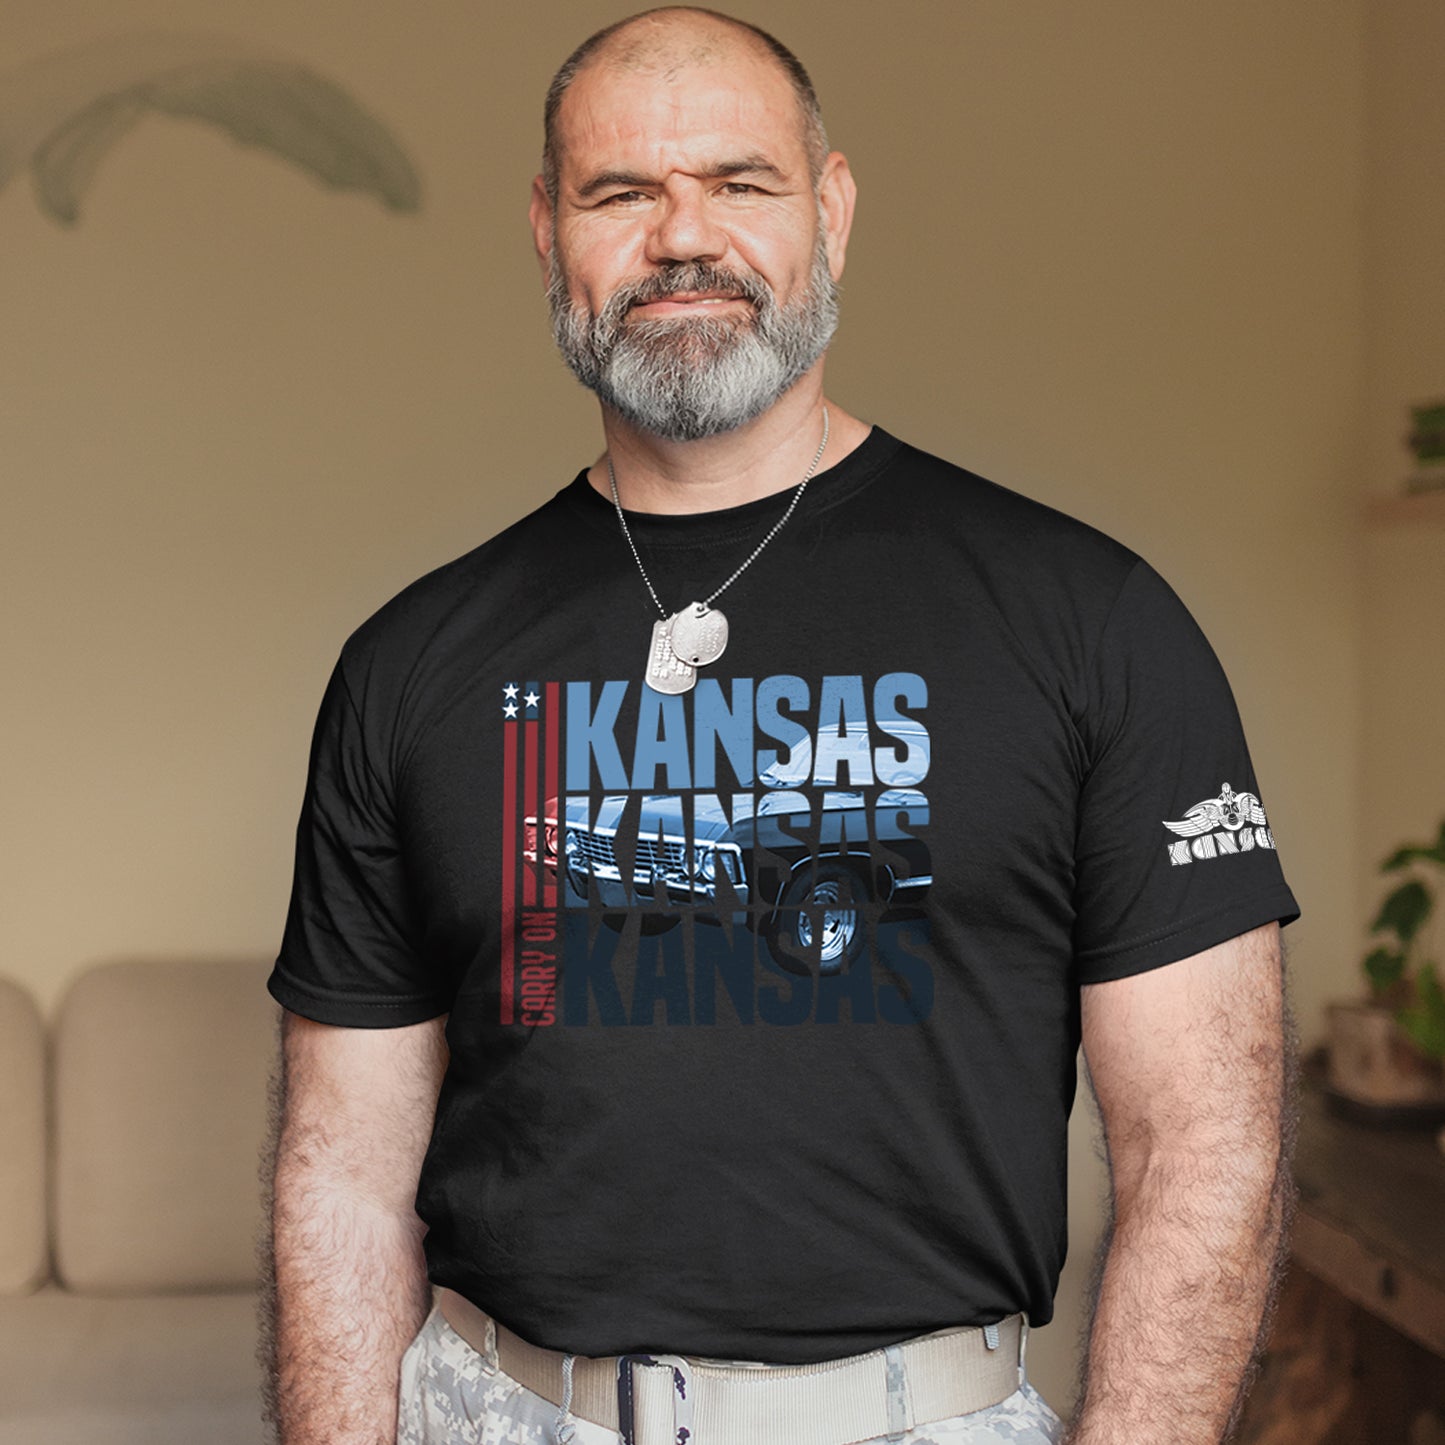 A male model wearing a black tee shirt. In the front of the shirt is blue text that says “Kansas Kansas Kansas,” with a black Chevy Impala superimposed on the text. On the left of the text are three red stripes with red text saying “carry on.”